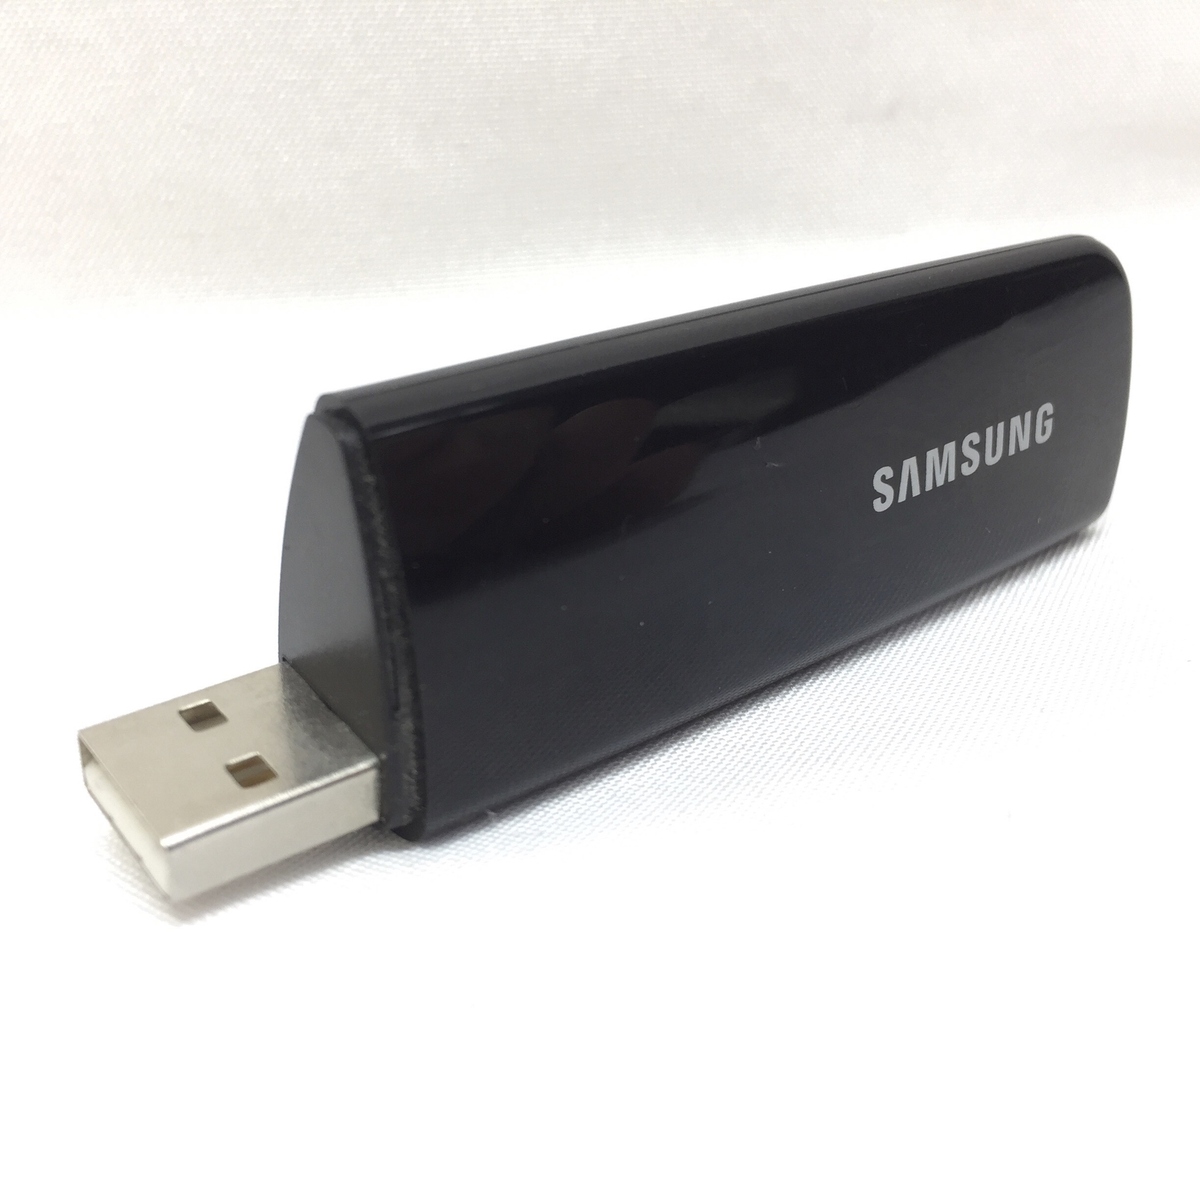 What Is Samsung Wireless Lan Adapter